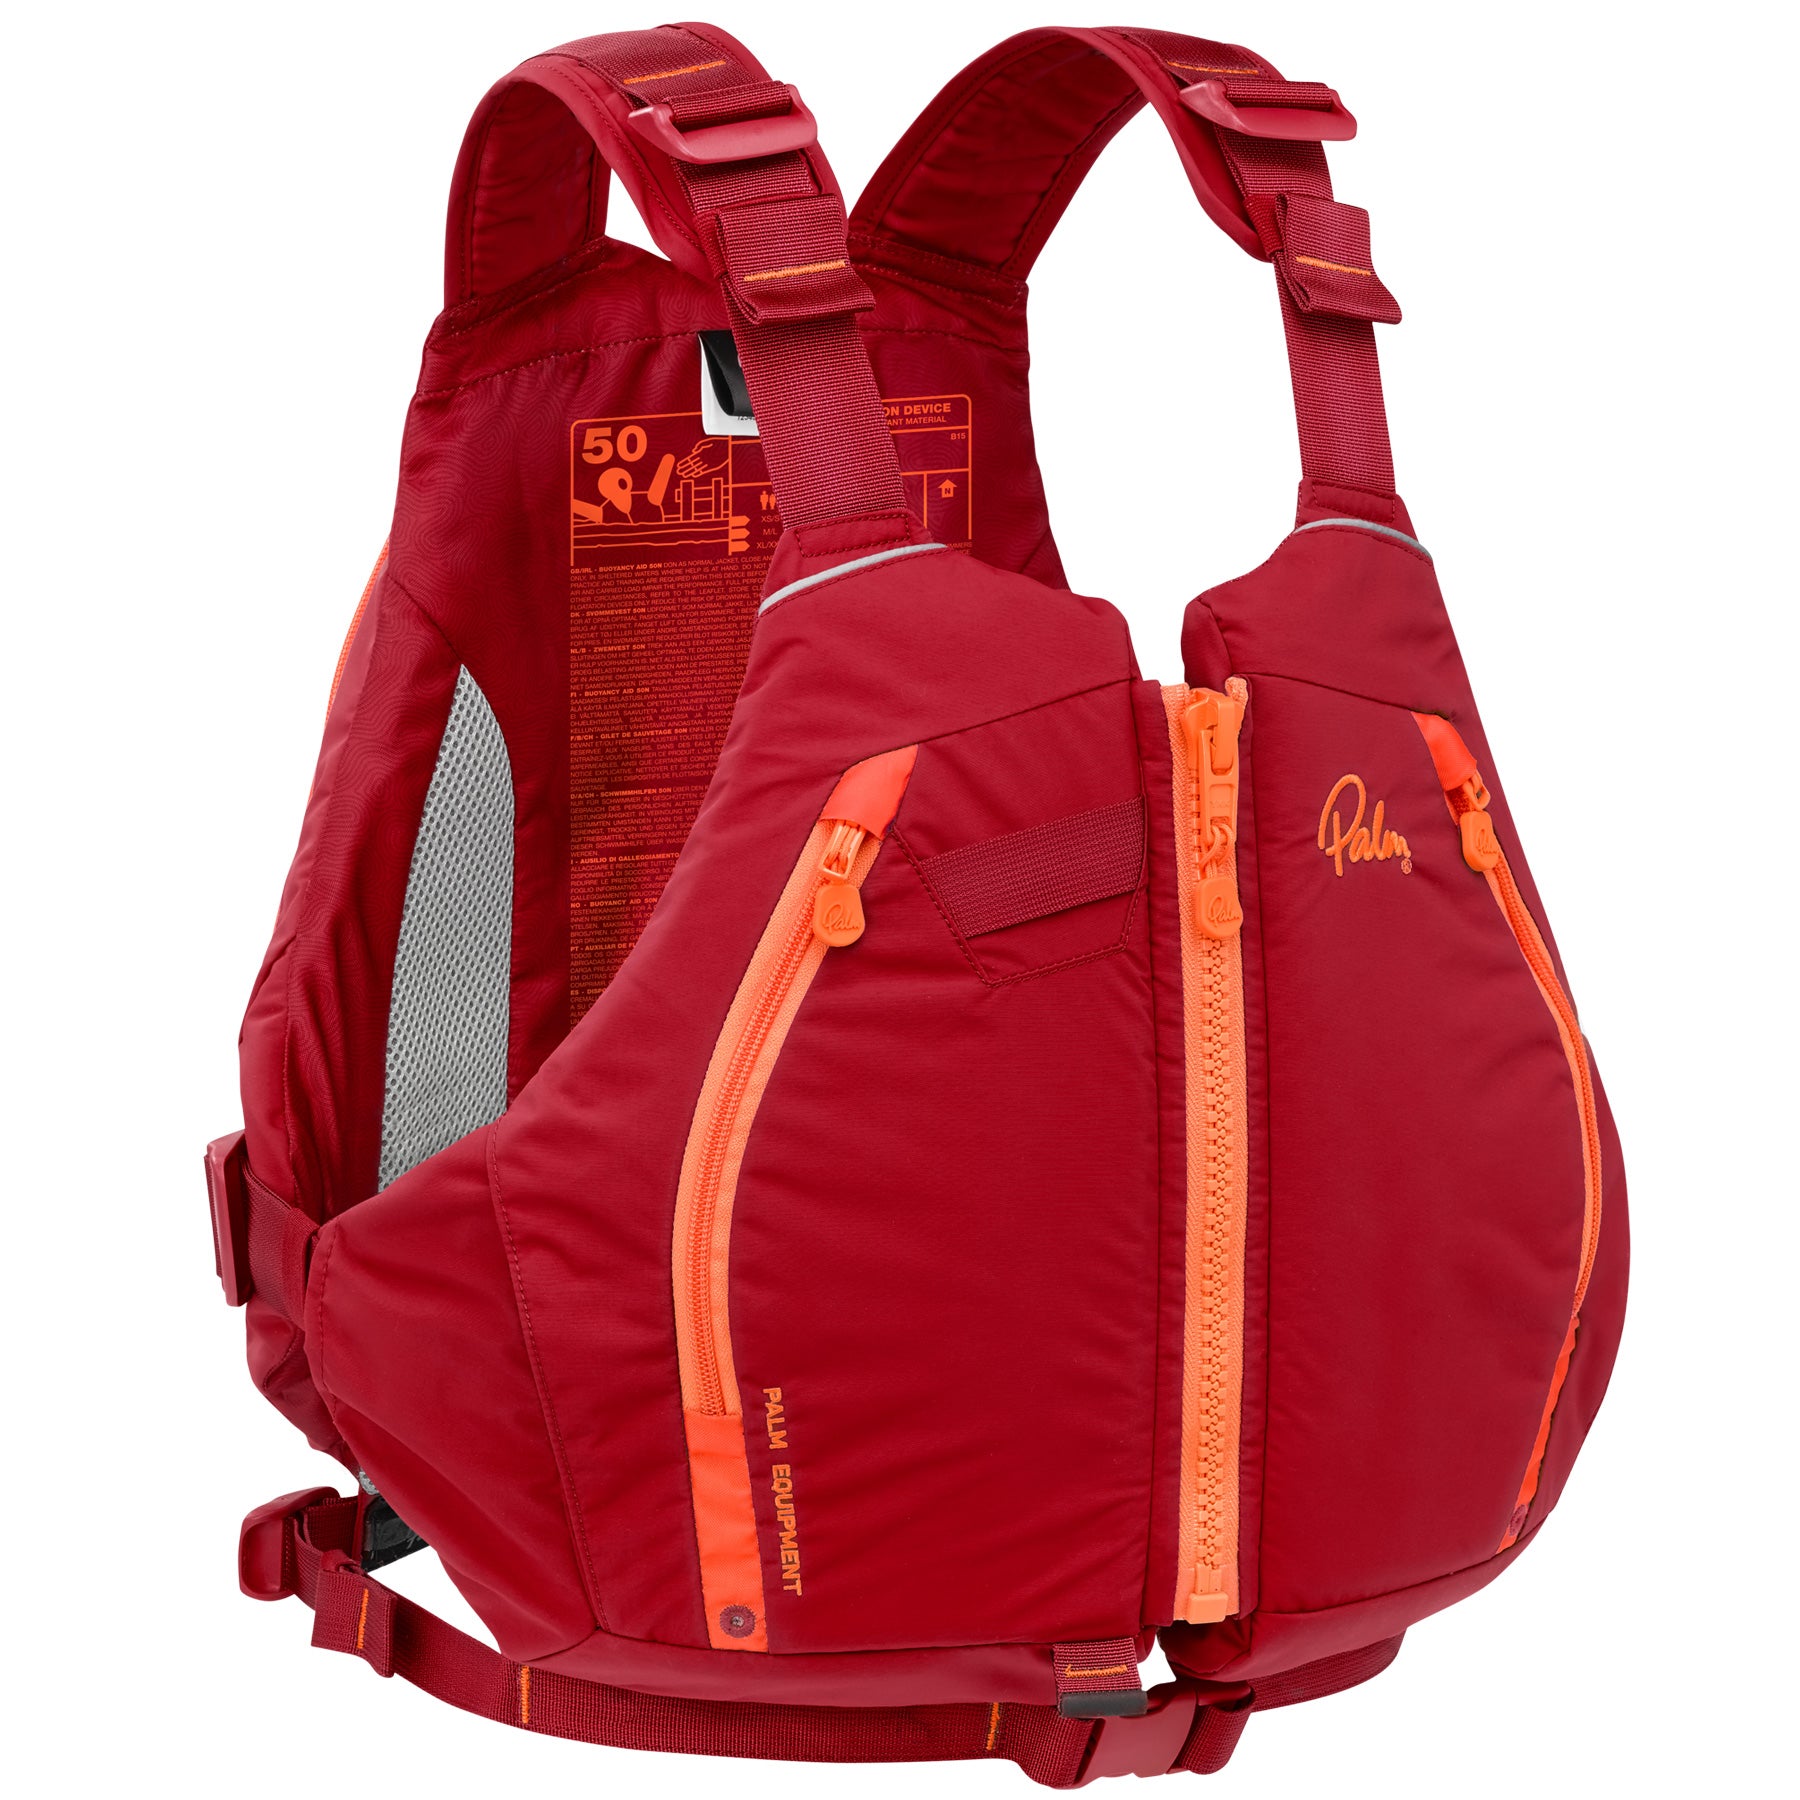 Palm Peyto buoyancy aid in chilli red